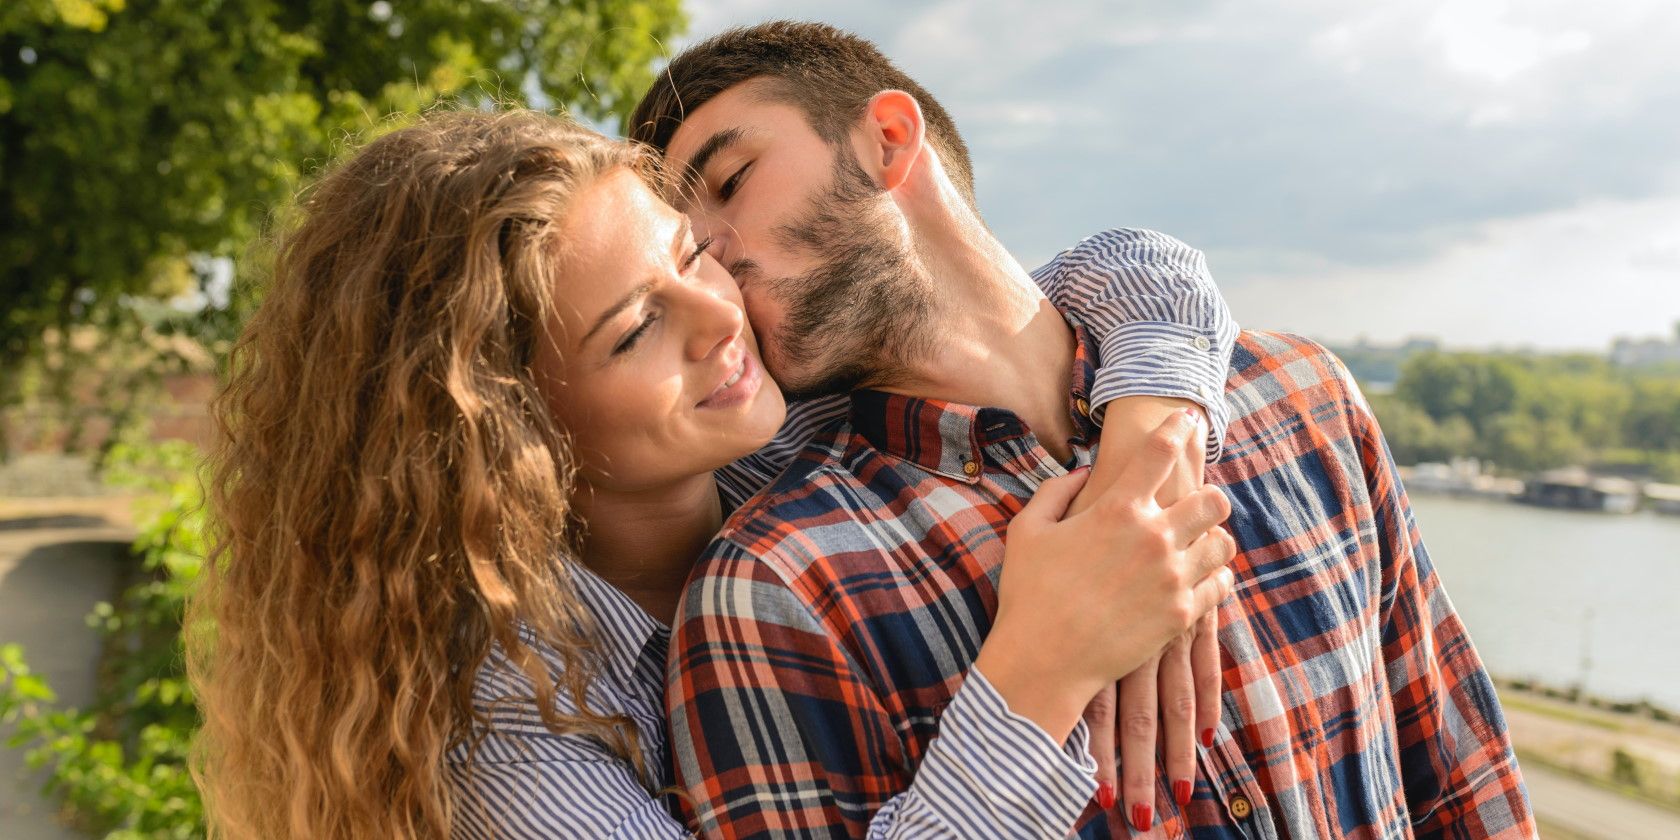 Happy woman embracing man while he kisses her cheek